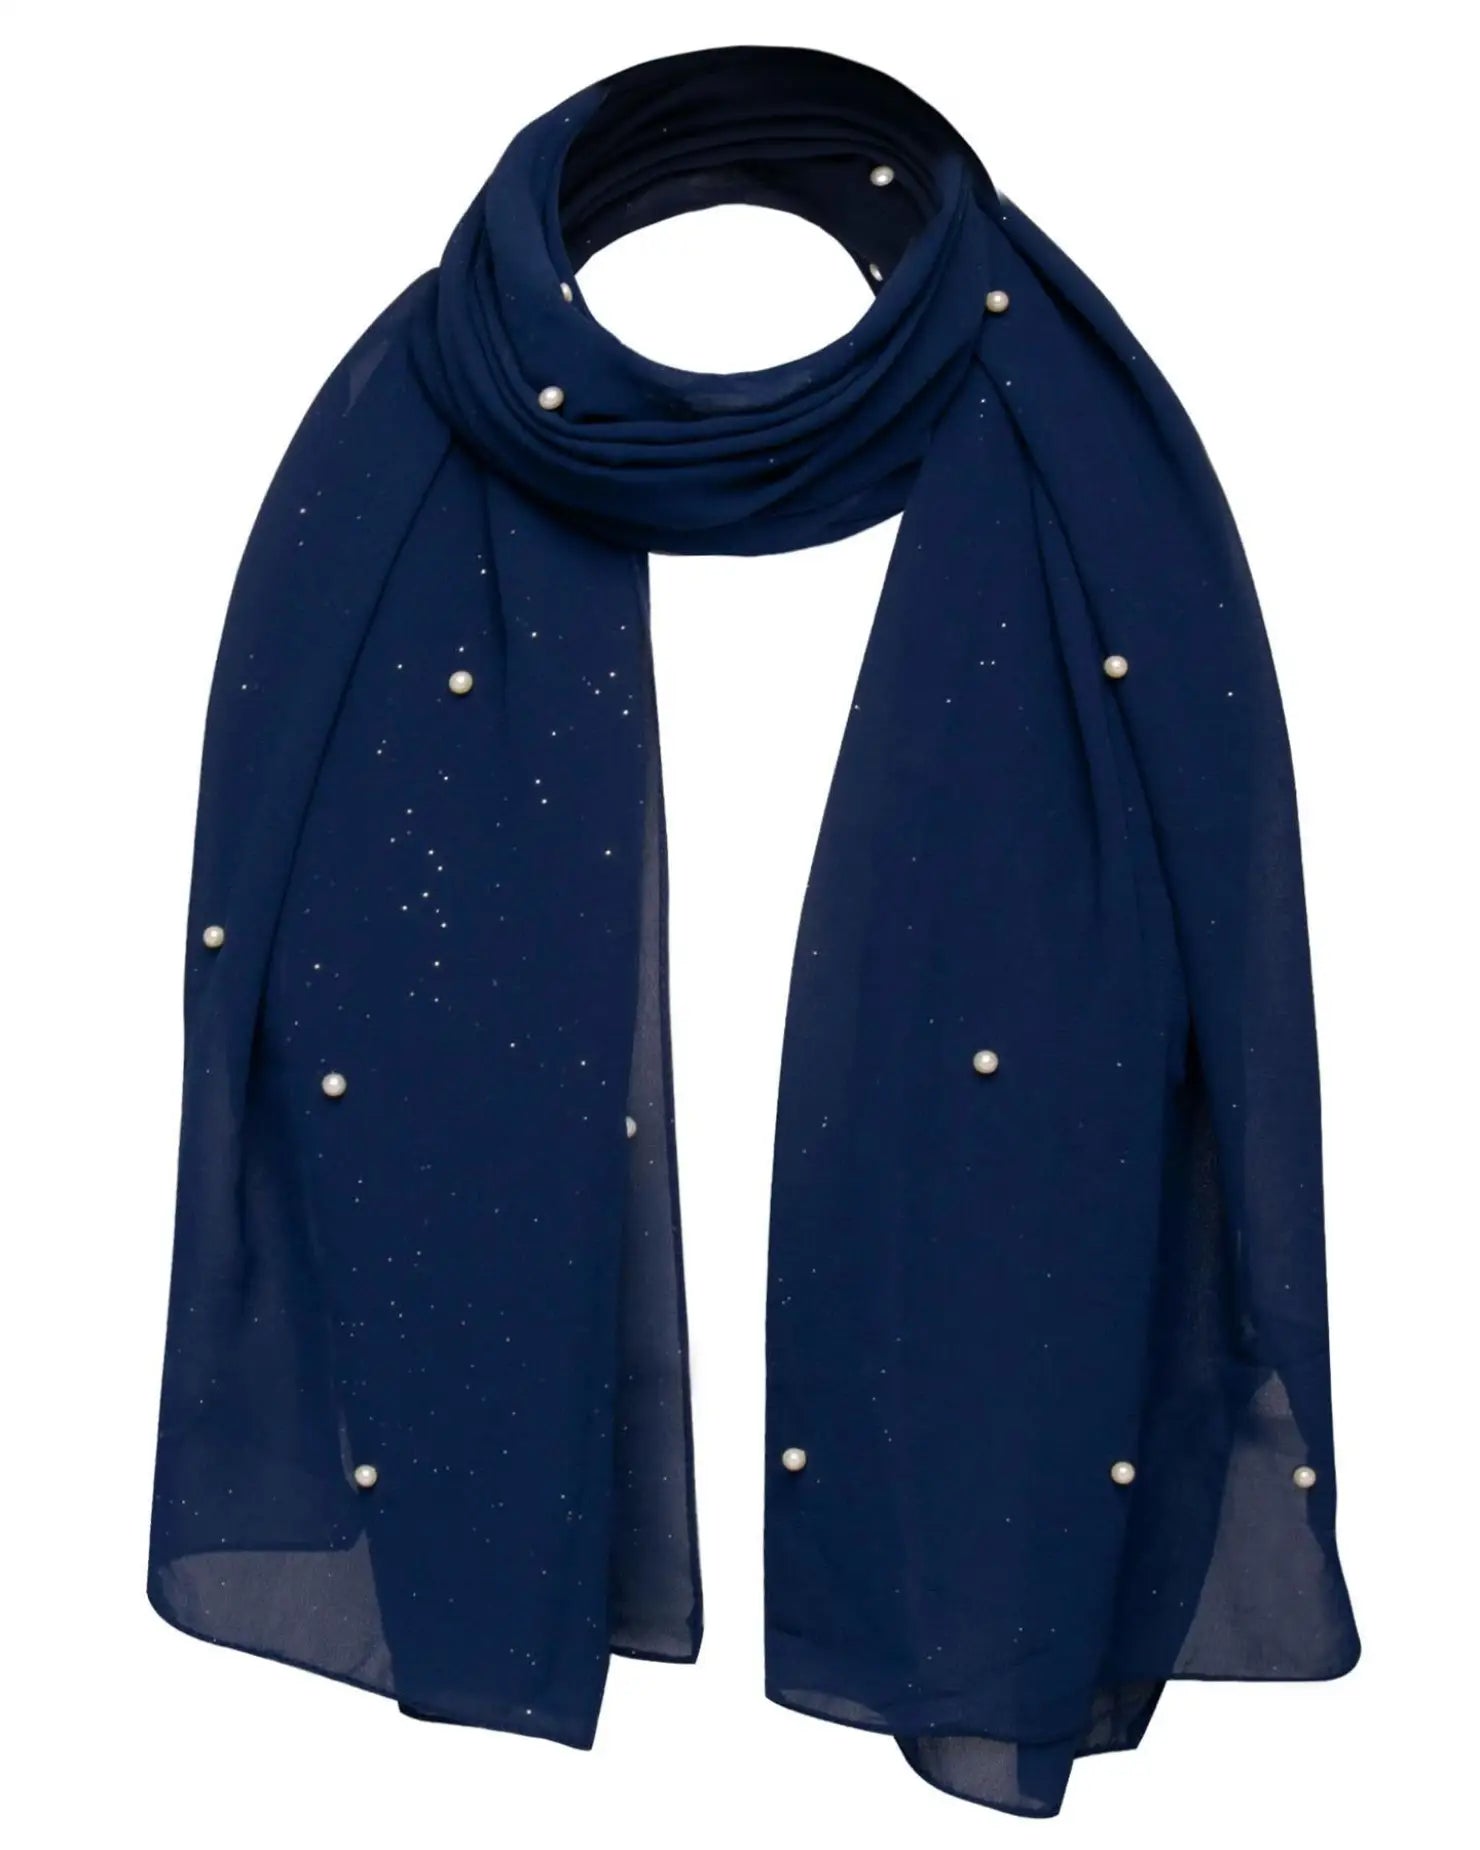 Navy chiffon scarf with pearls for sale